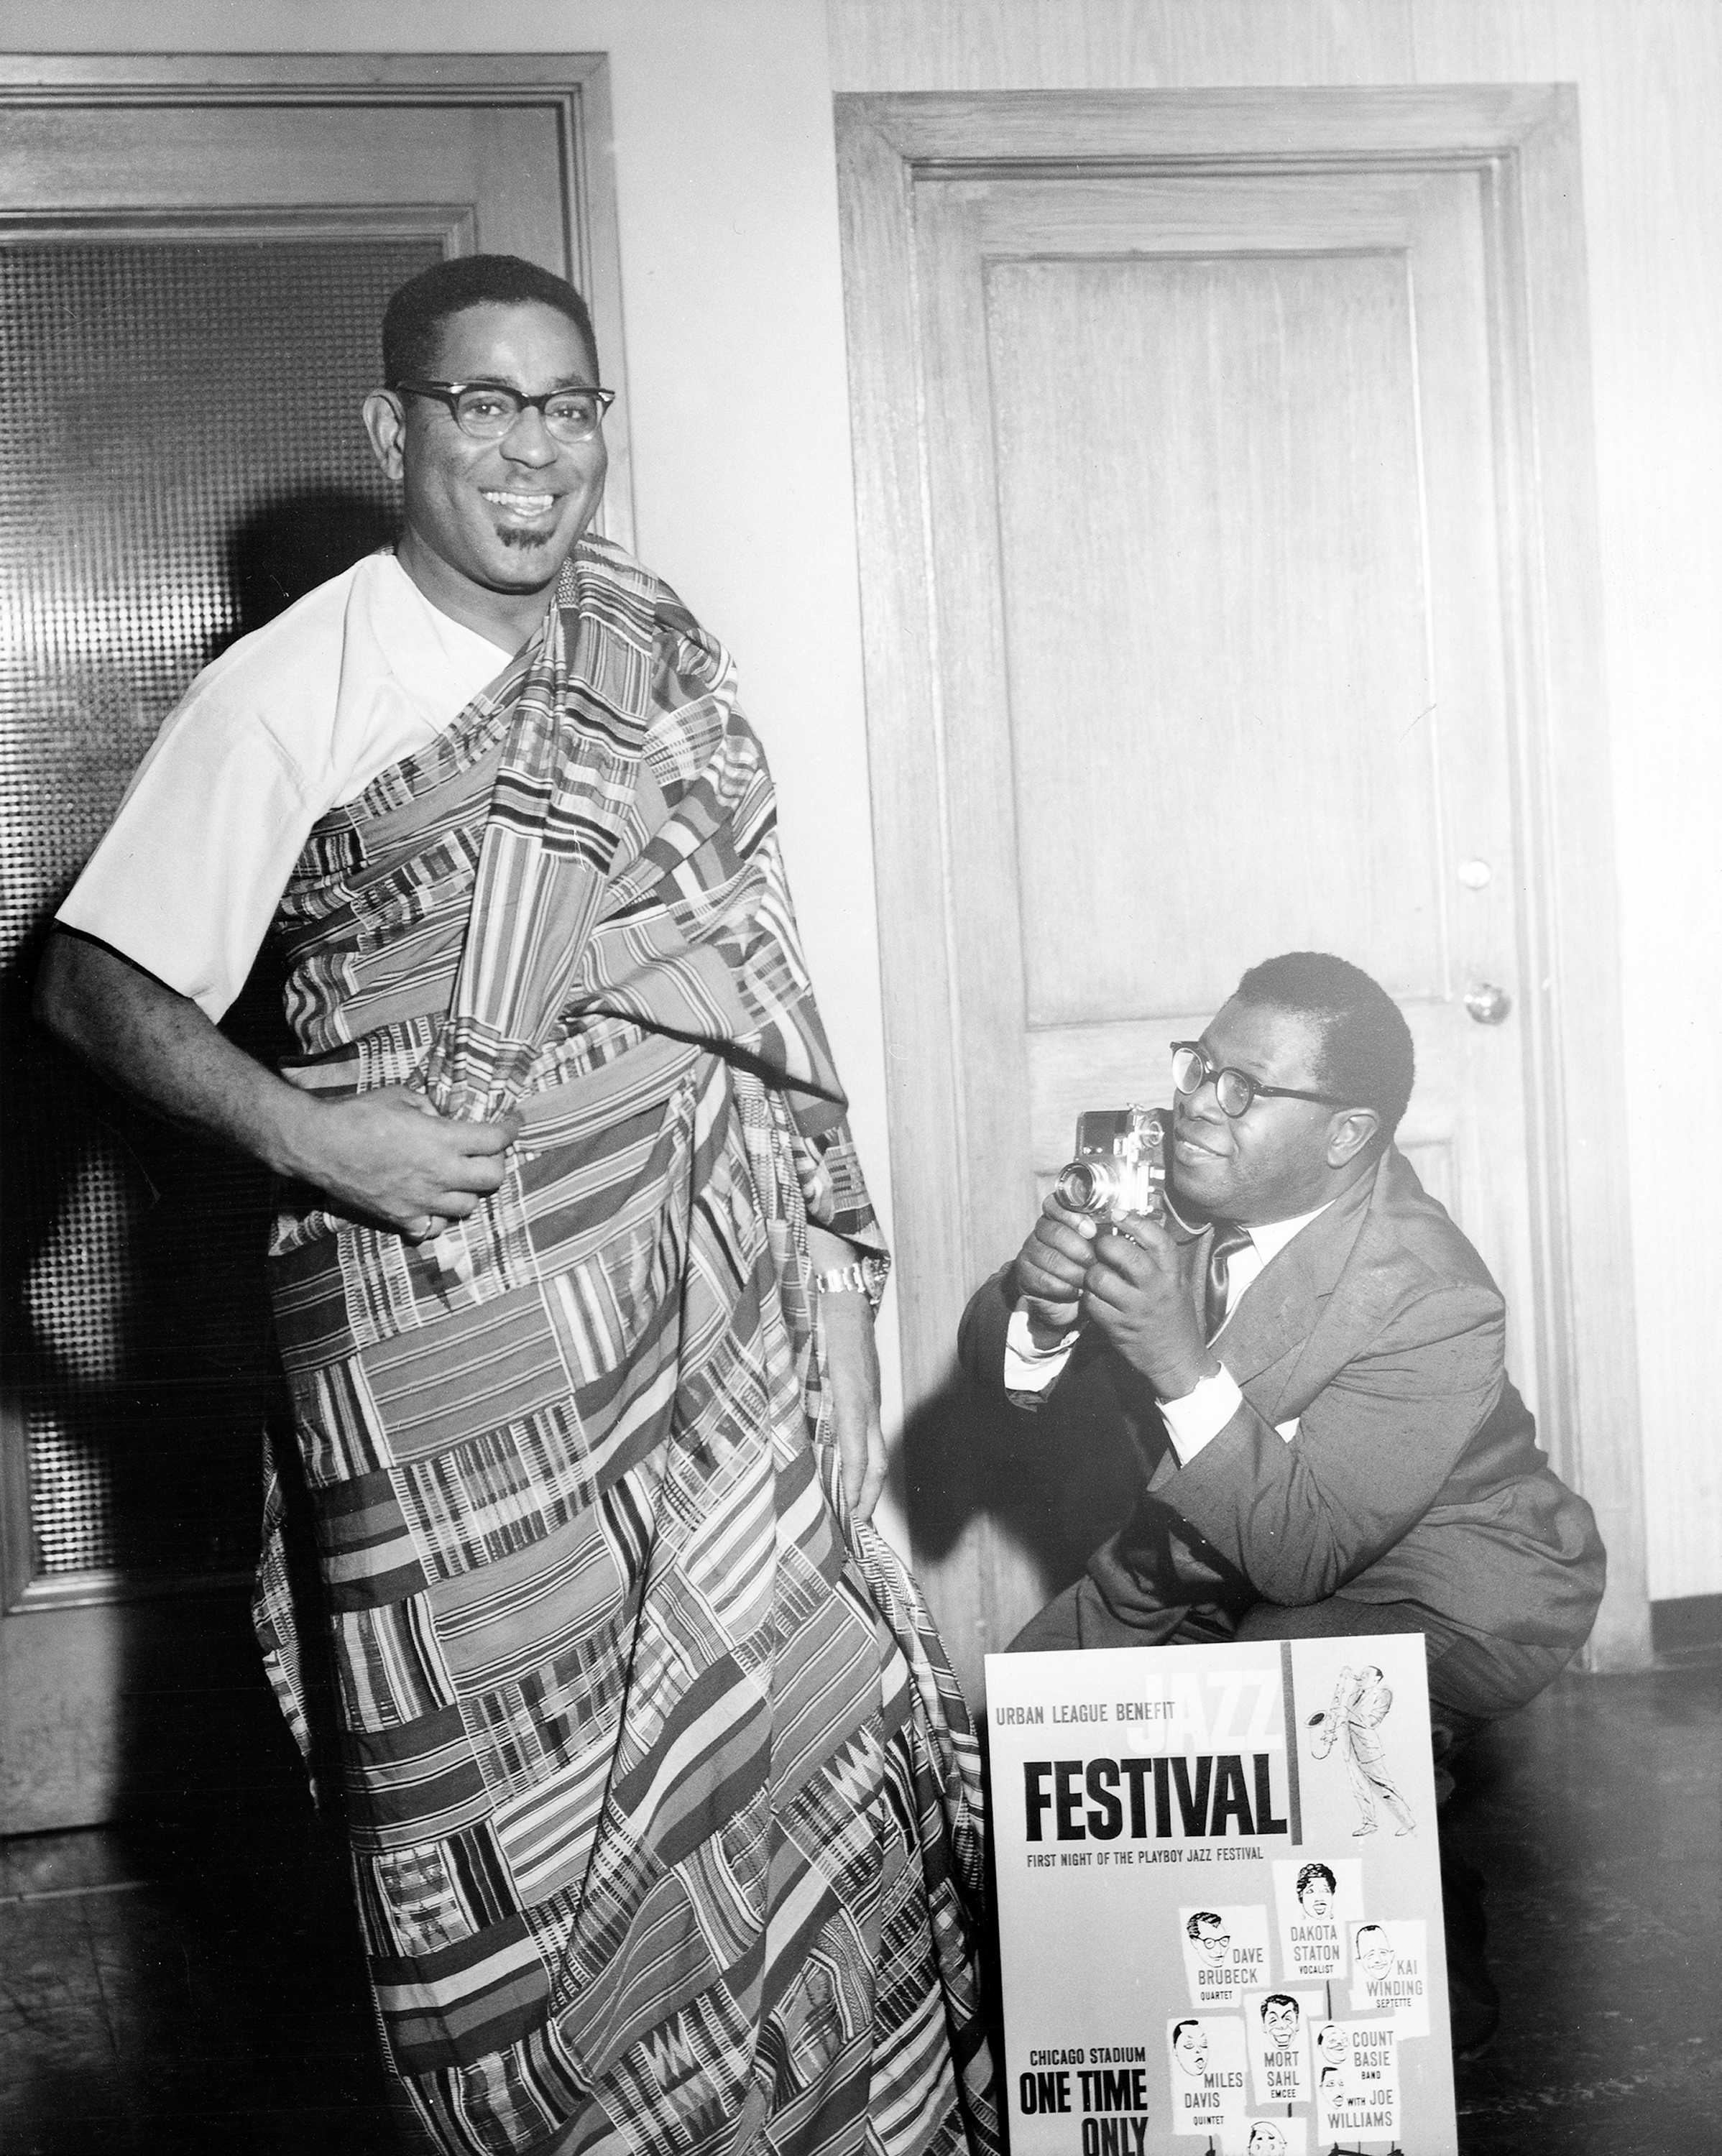 Black and white photograph of Dizzy Gillespie at festival